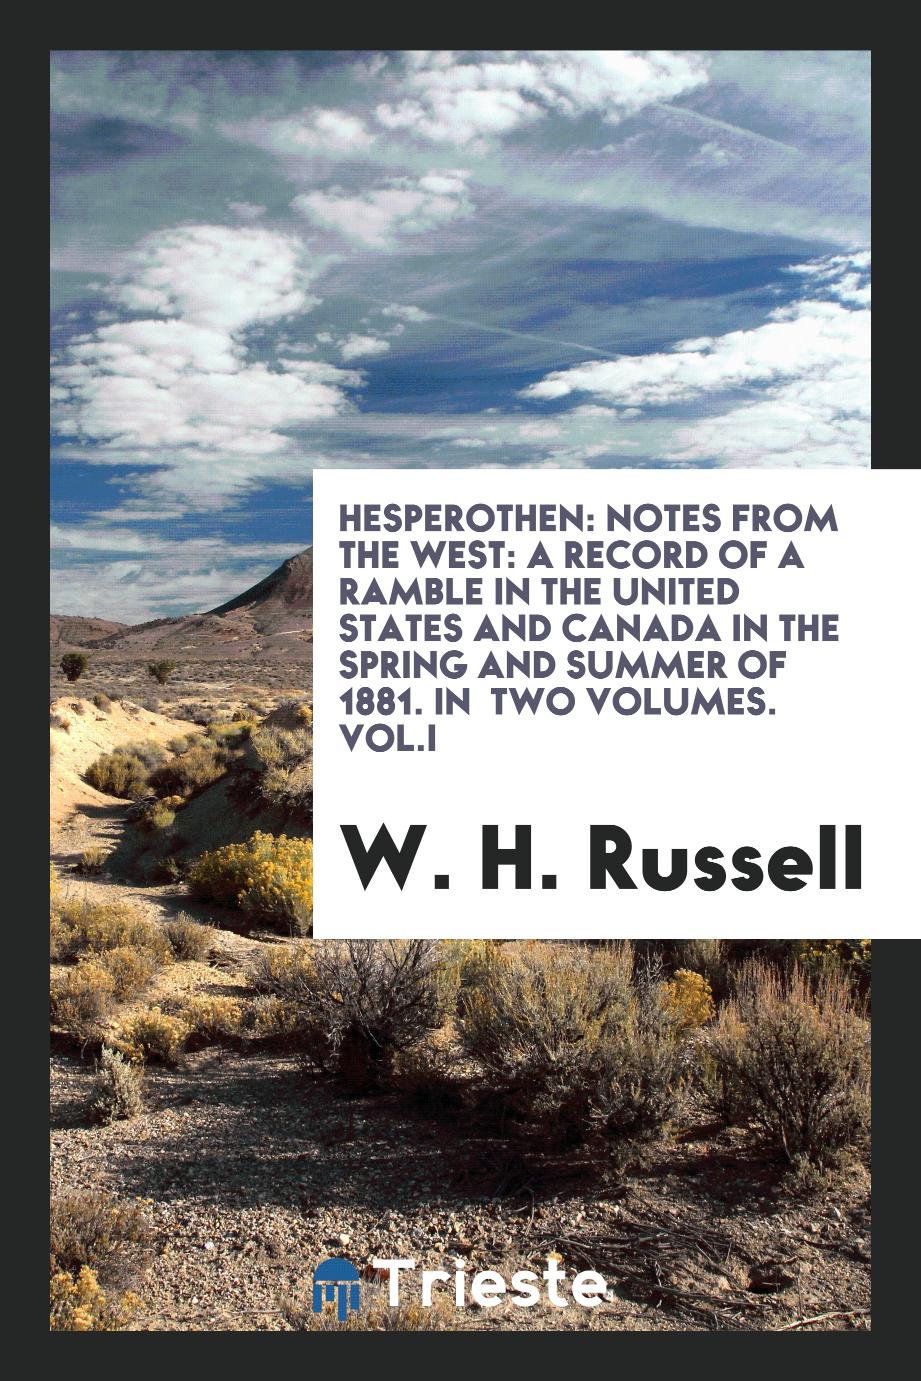 Hesperothen: notes from the West: A Record of a Ramble in the United States and Canada in the Spring and Summer of 1881. In two volumes. Vol.I